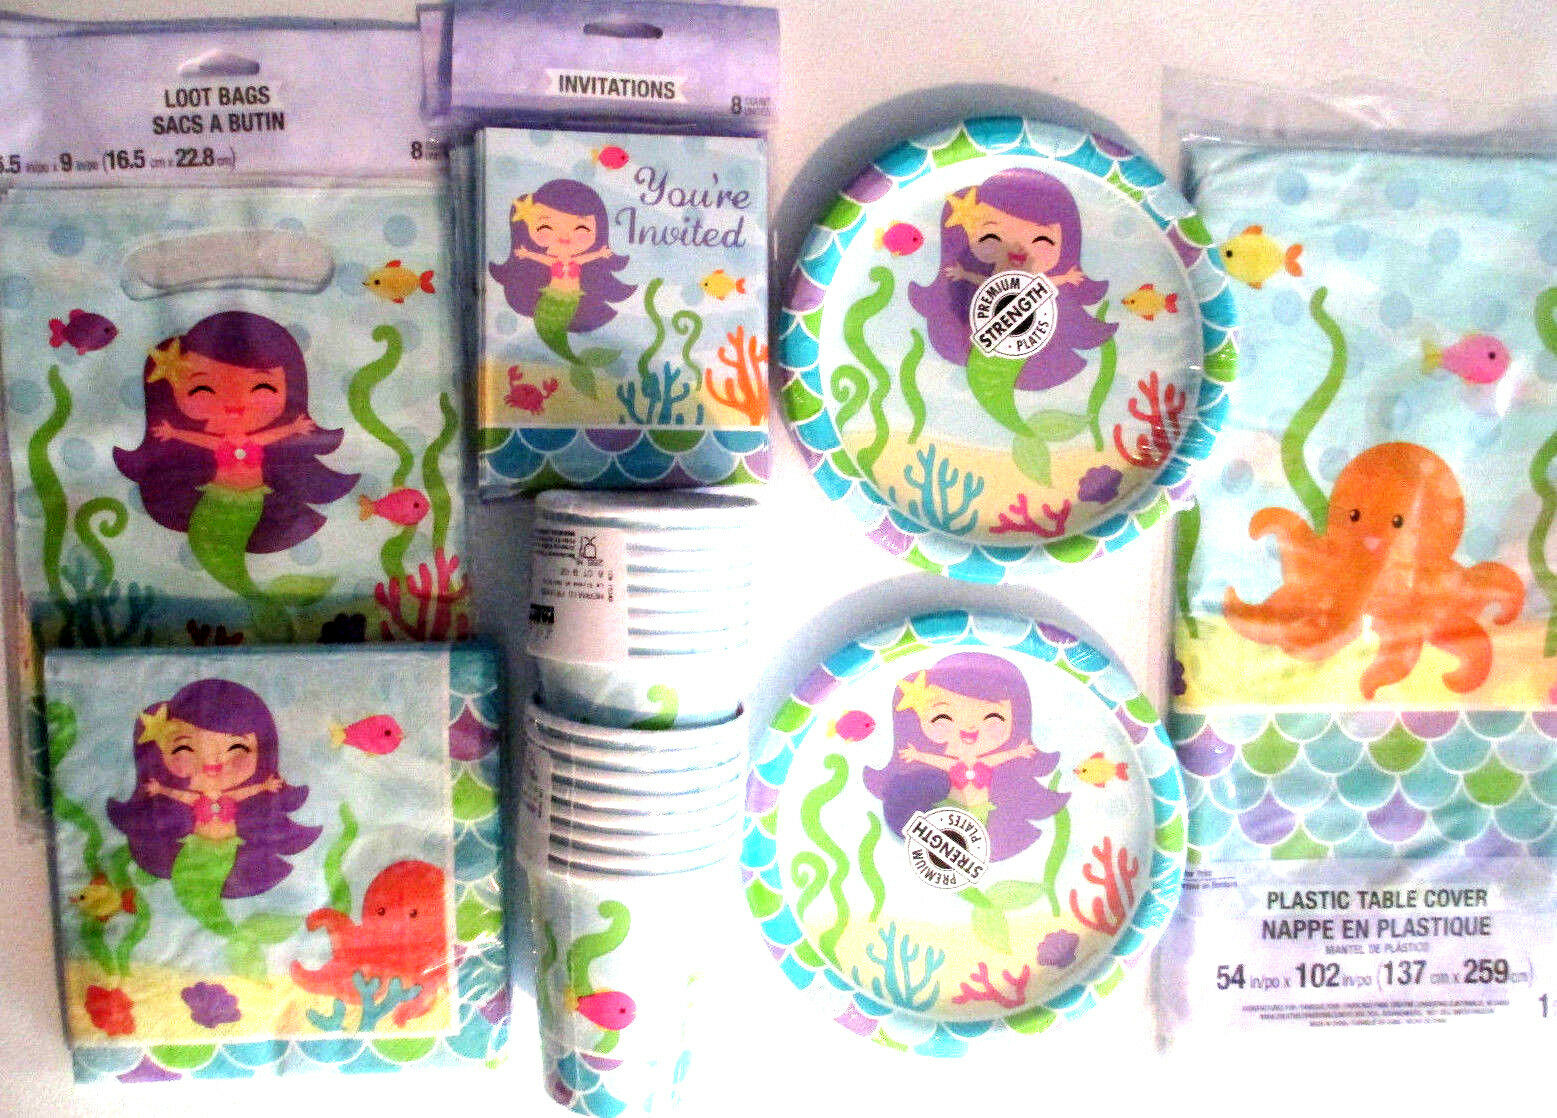 Mermaid Friends - Birthday Party Supply Deluxe Kit W/ Loot Bags & Invitations